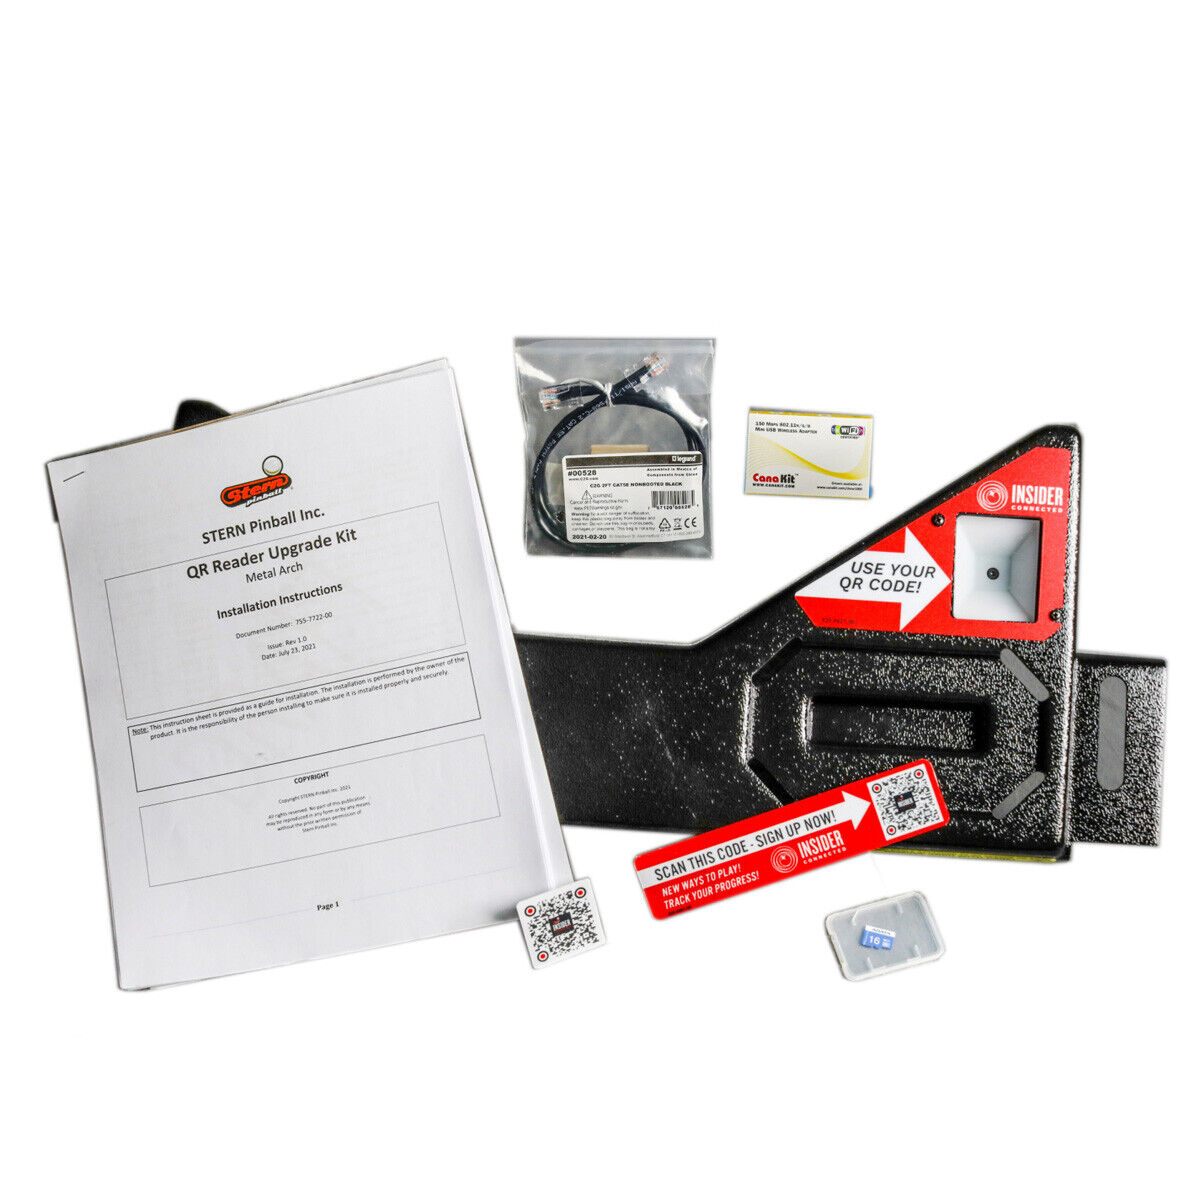 Stern Insider Connected Upgrade Kit - Pro